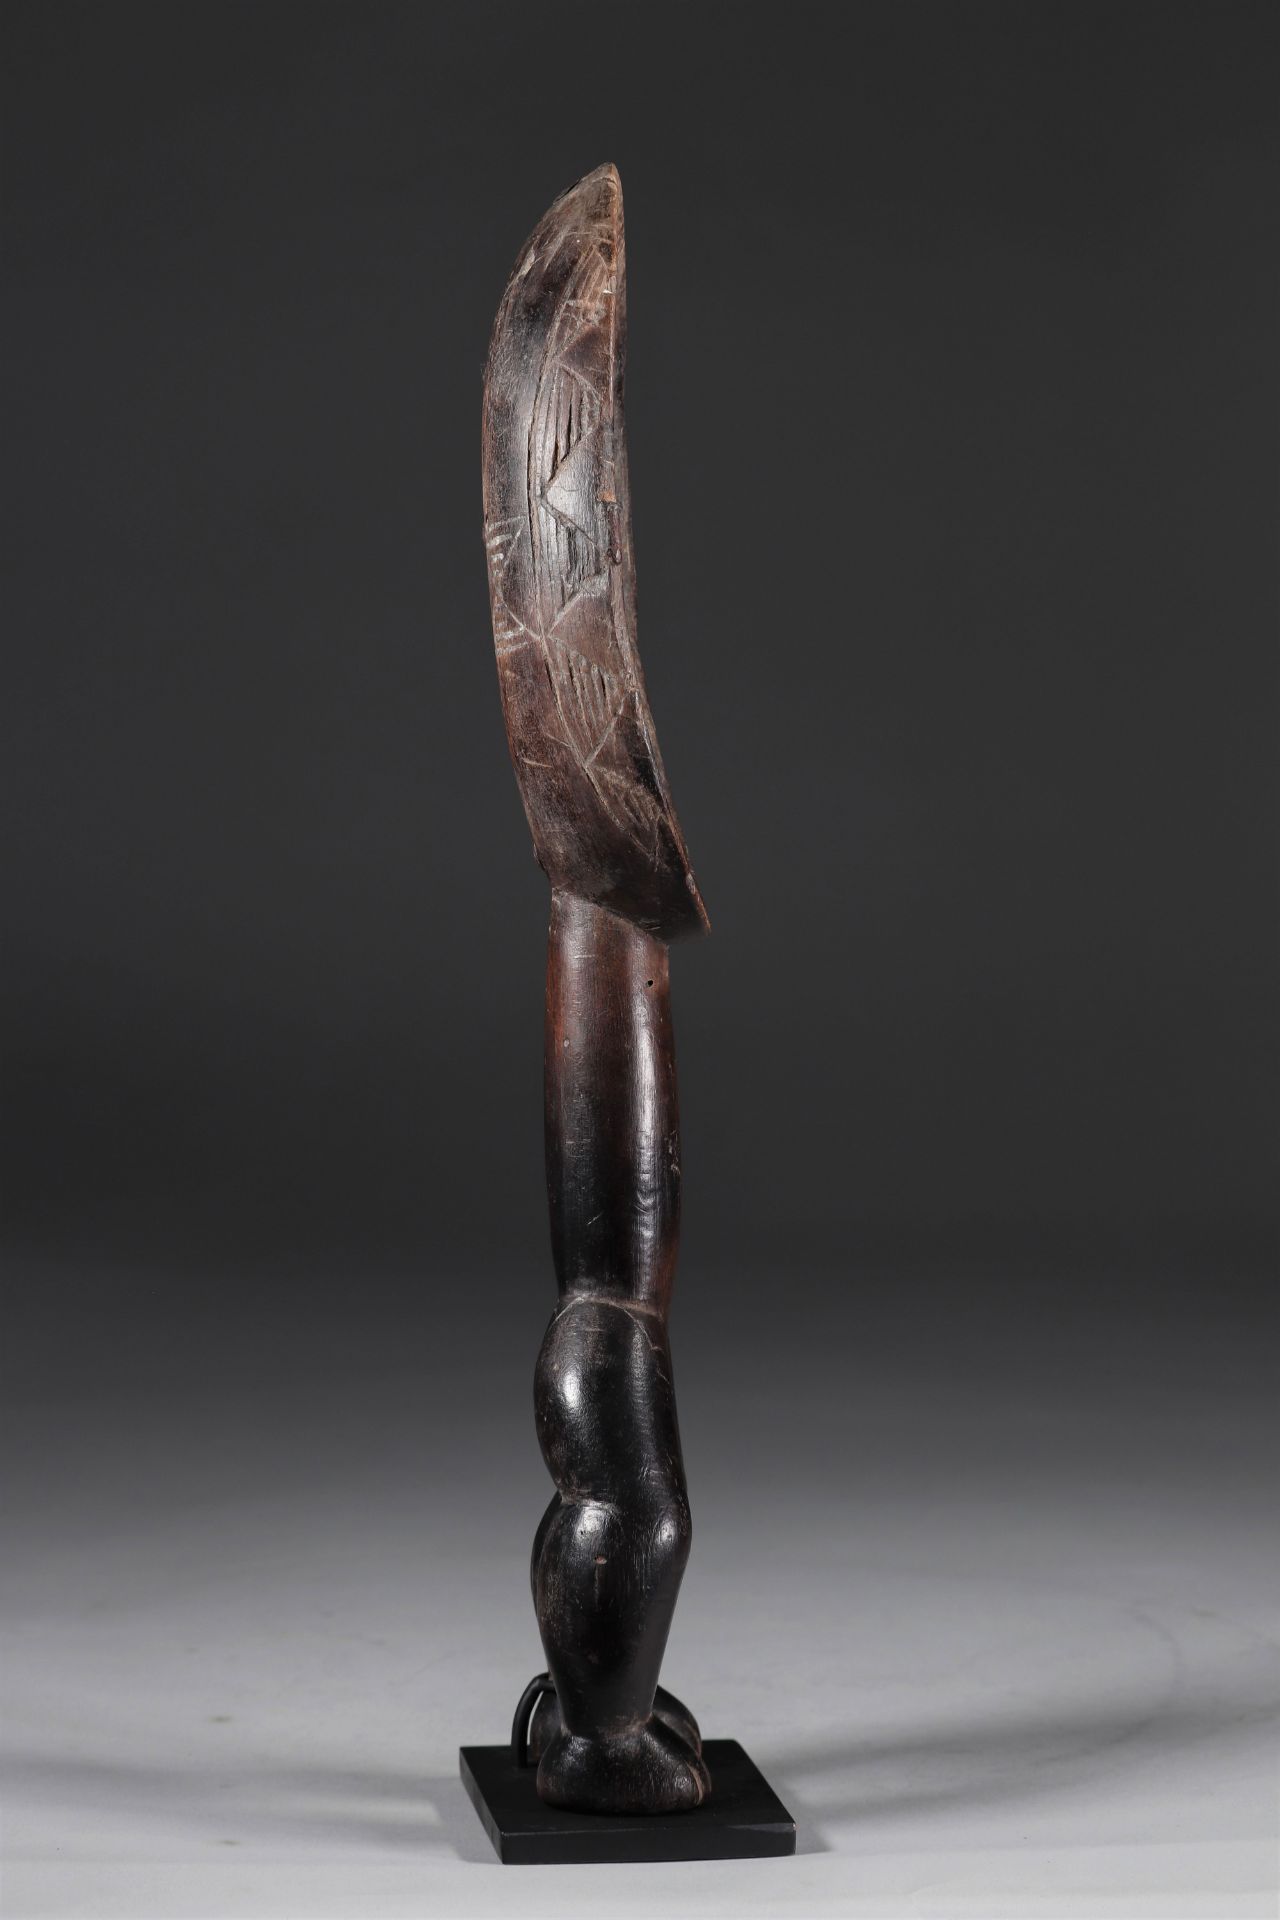 Ceremonial spoon Dan early 20th century beautiful patina - private collection Belgium - Image 3 of 6